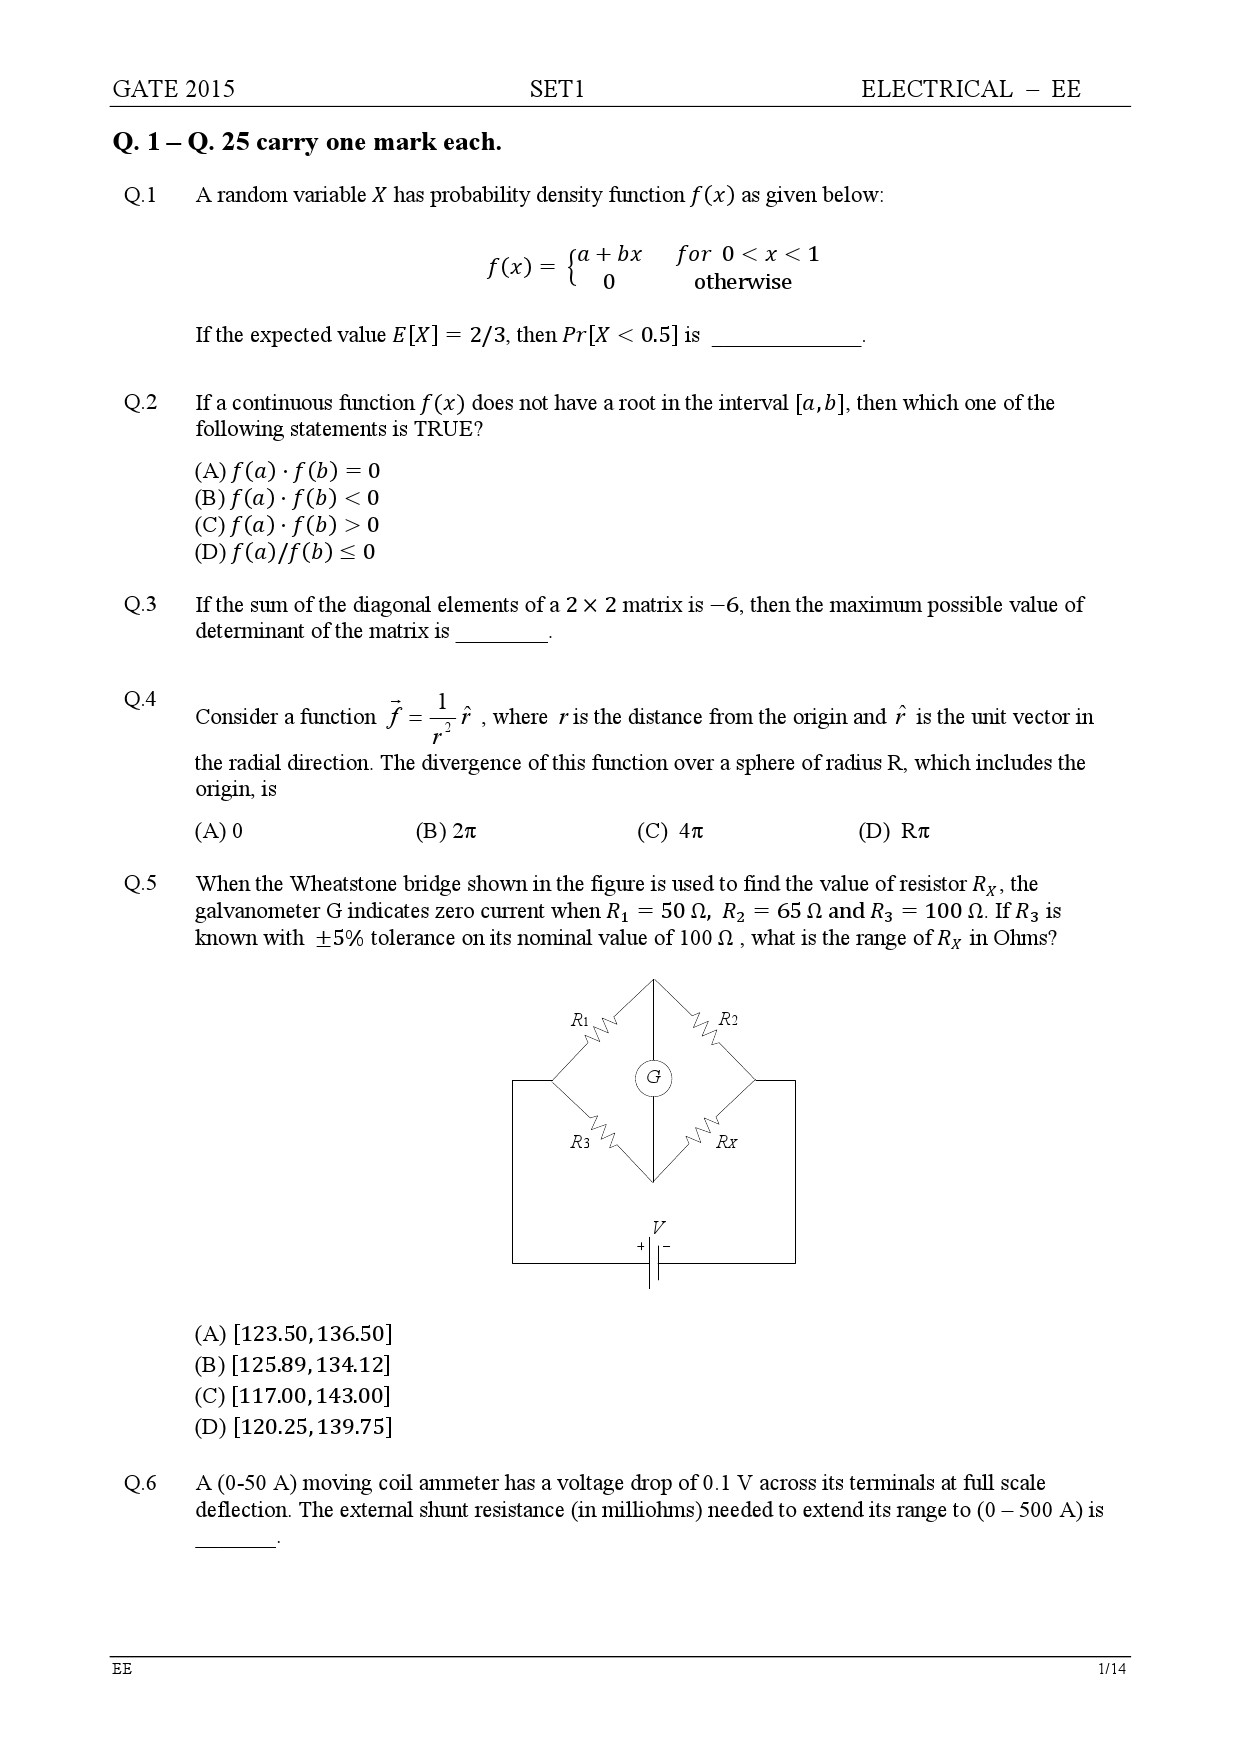 GATE Exam Question Paper 2015 Electrical Engineering Set 1 1